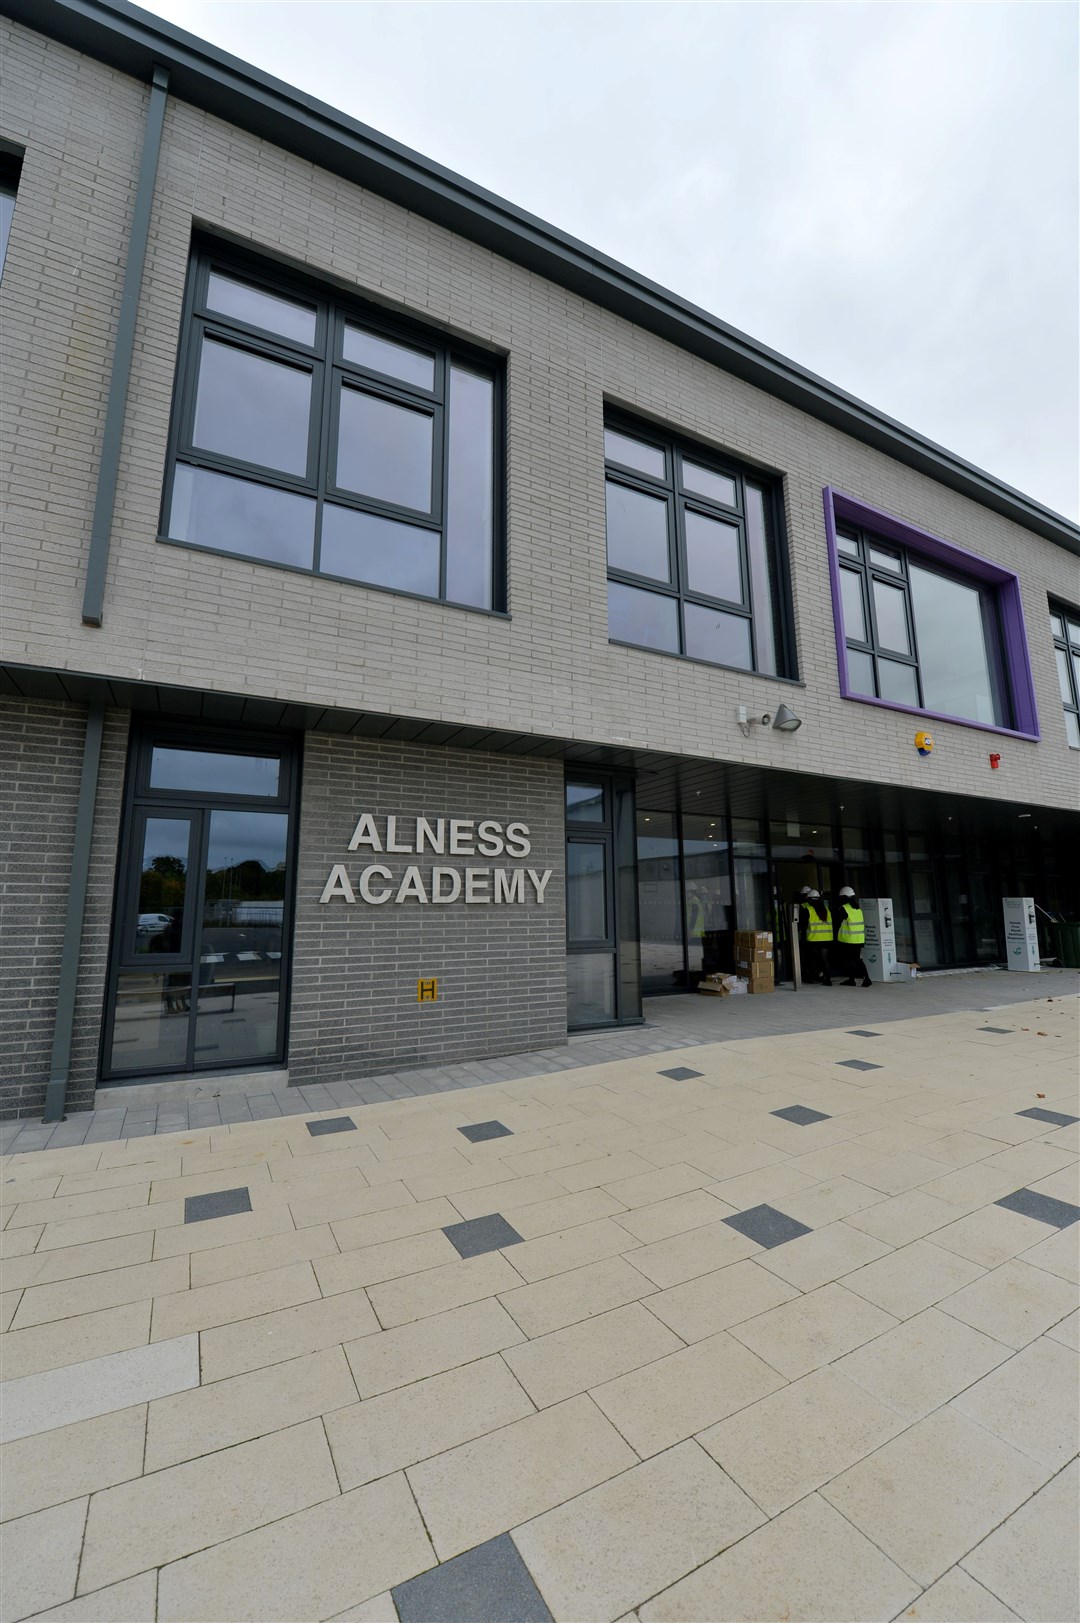 A positive Covid-19 case has been logged at Alness Academy.